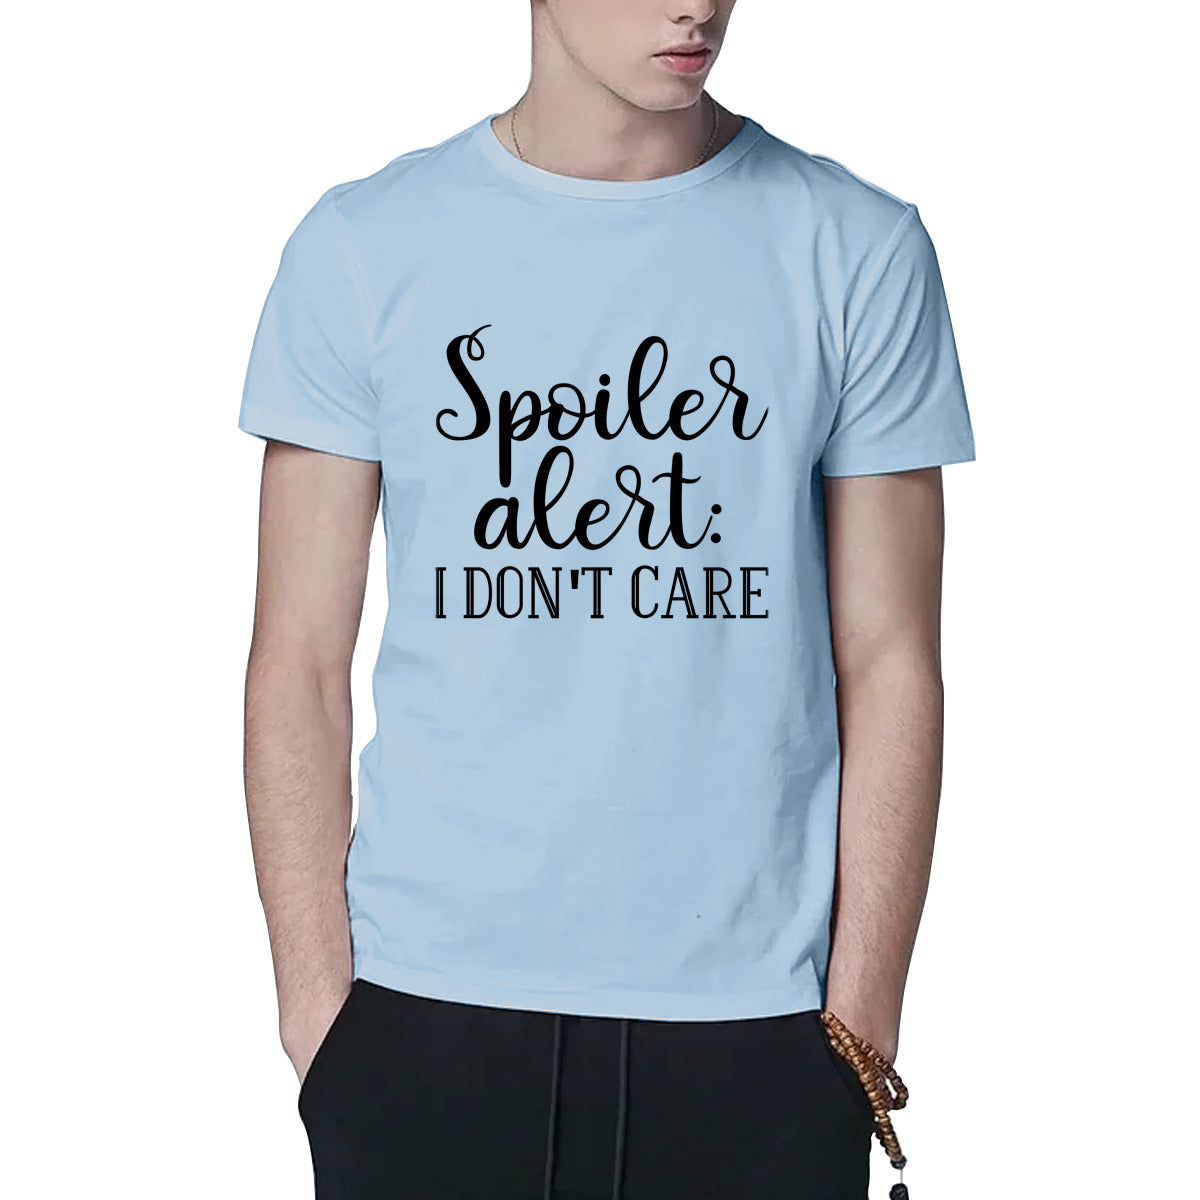 Graphic ‘Spoiler Alert, I Don’t Care’ Top - Show Your Attitude with Style